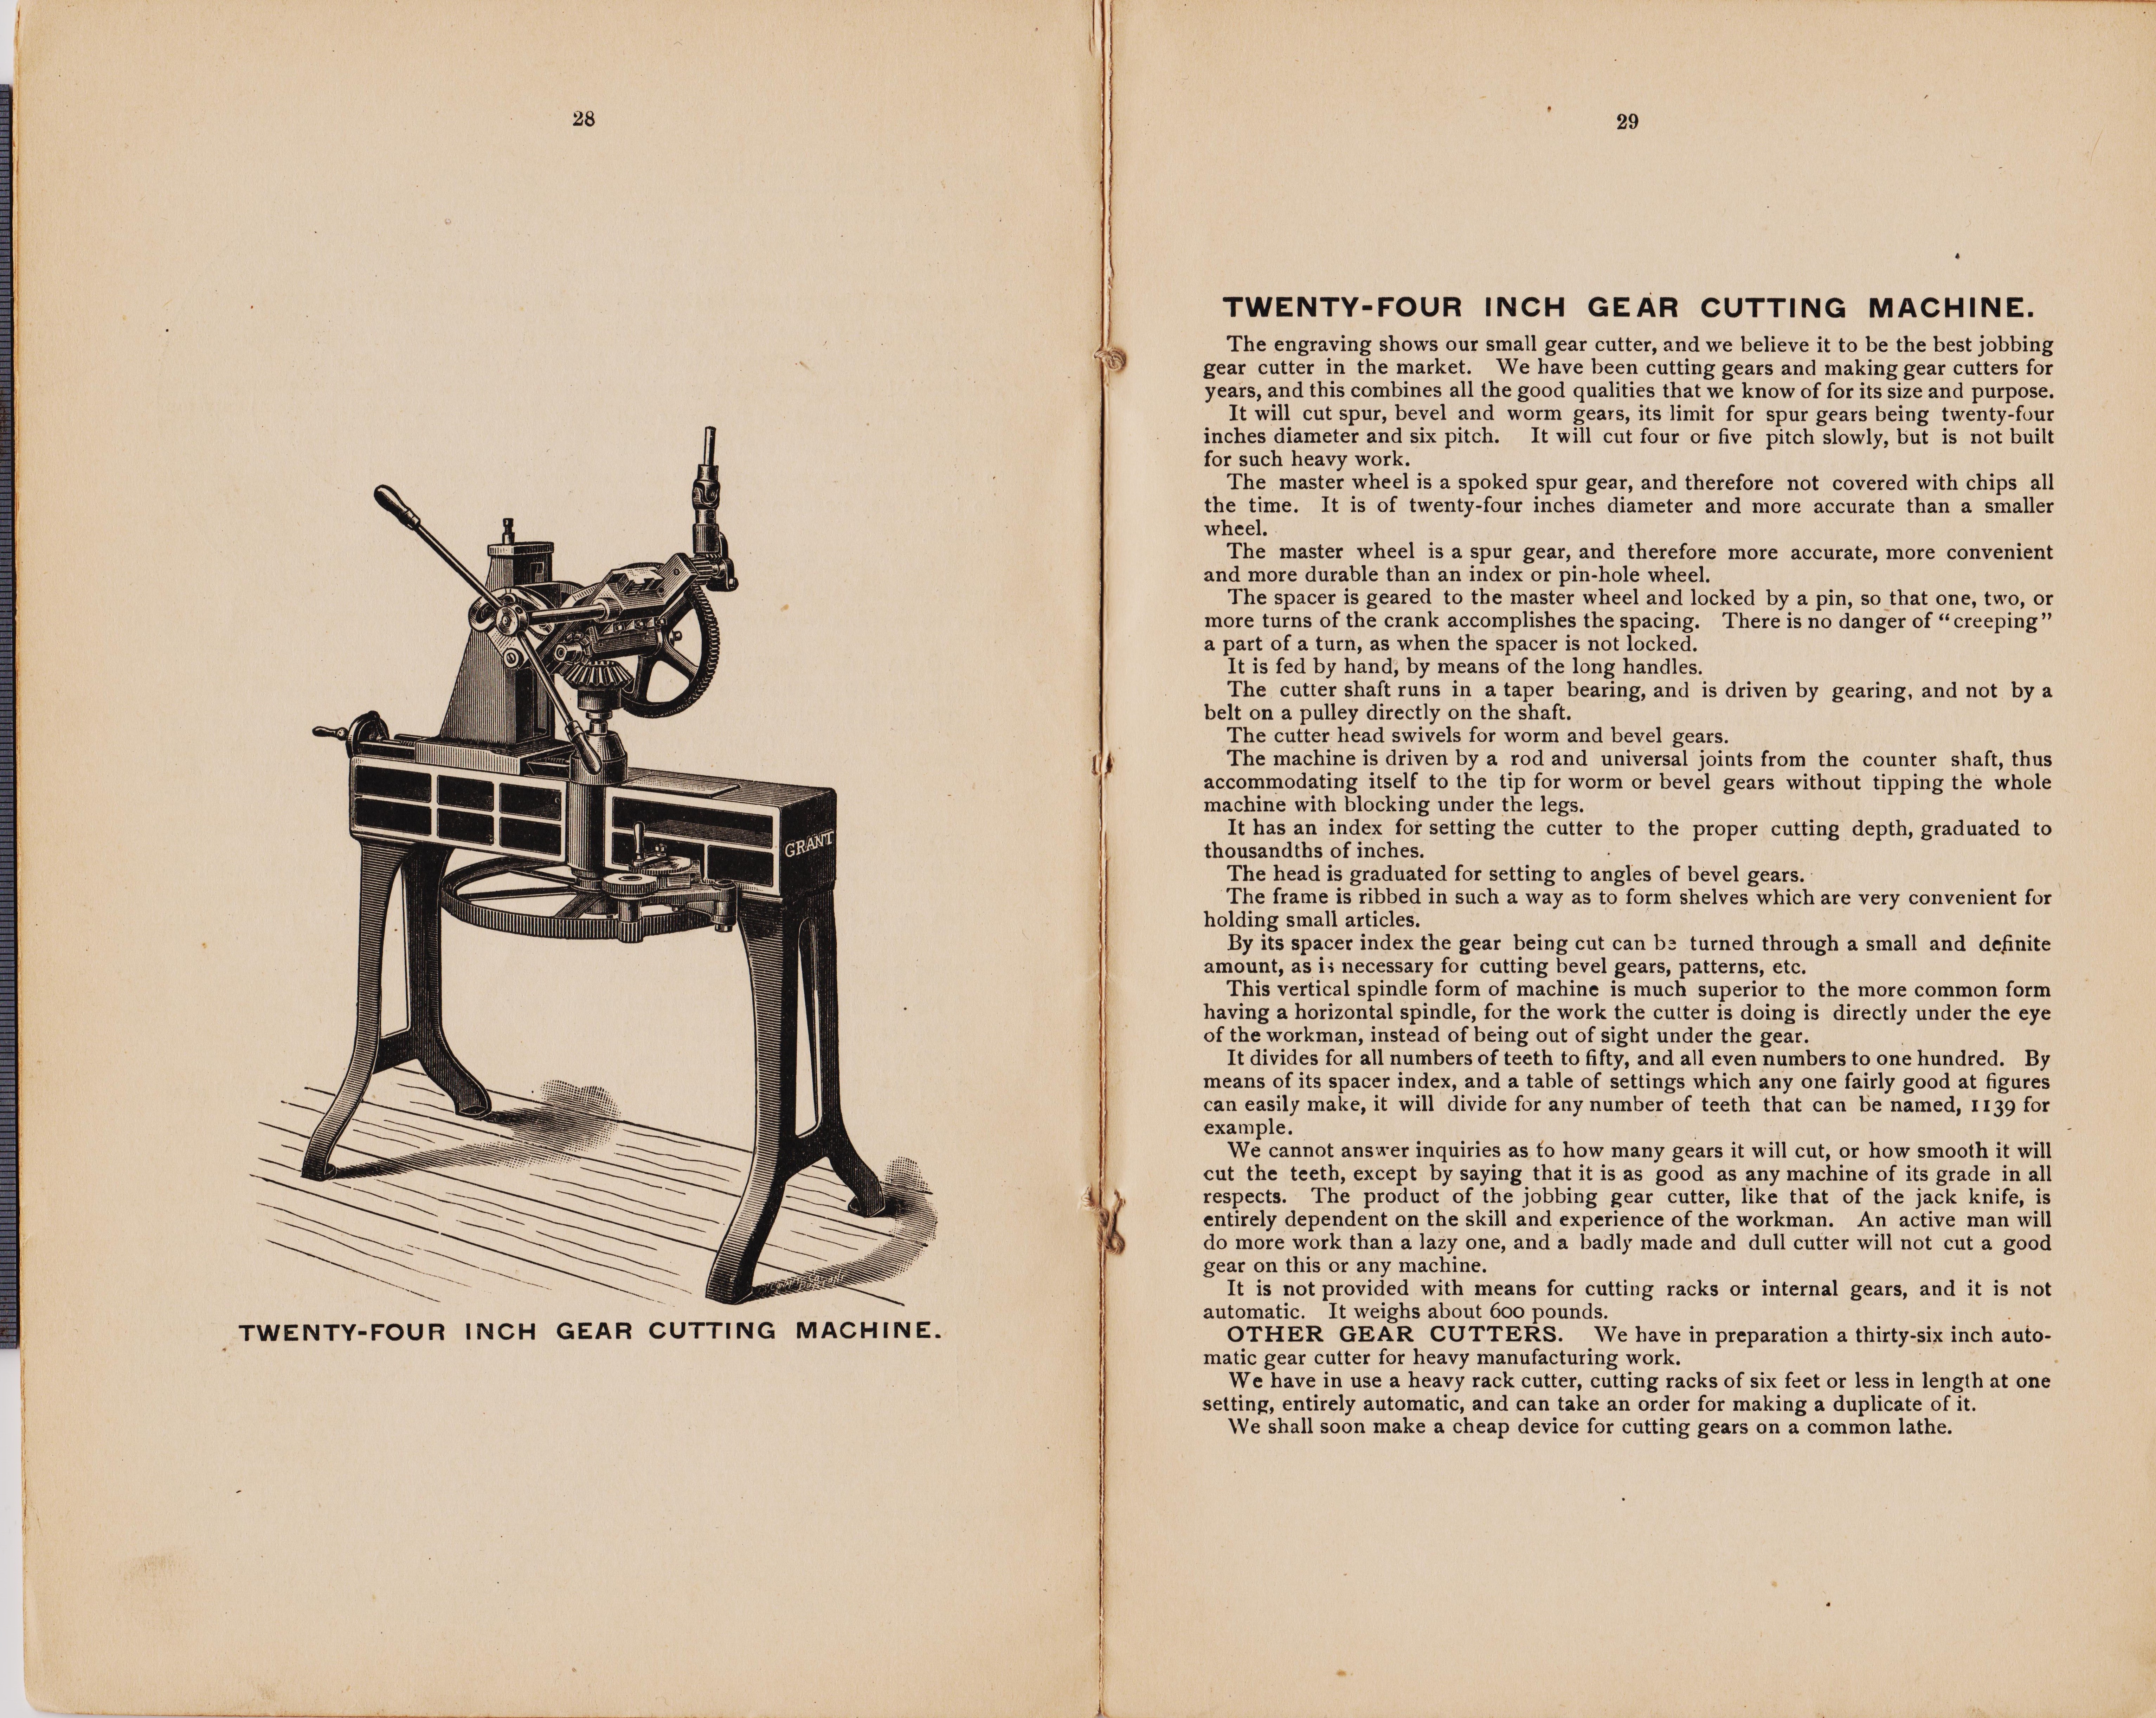 http://antiquemachinery.com/images-2020/Grants-Gear-Book-Lexington-Gear-Works-1892-page-28-29-An-24-inch-Gear-Cuttting-Machine-Grant-simular-to-Winton.jpg